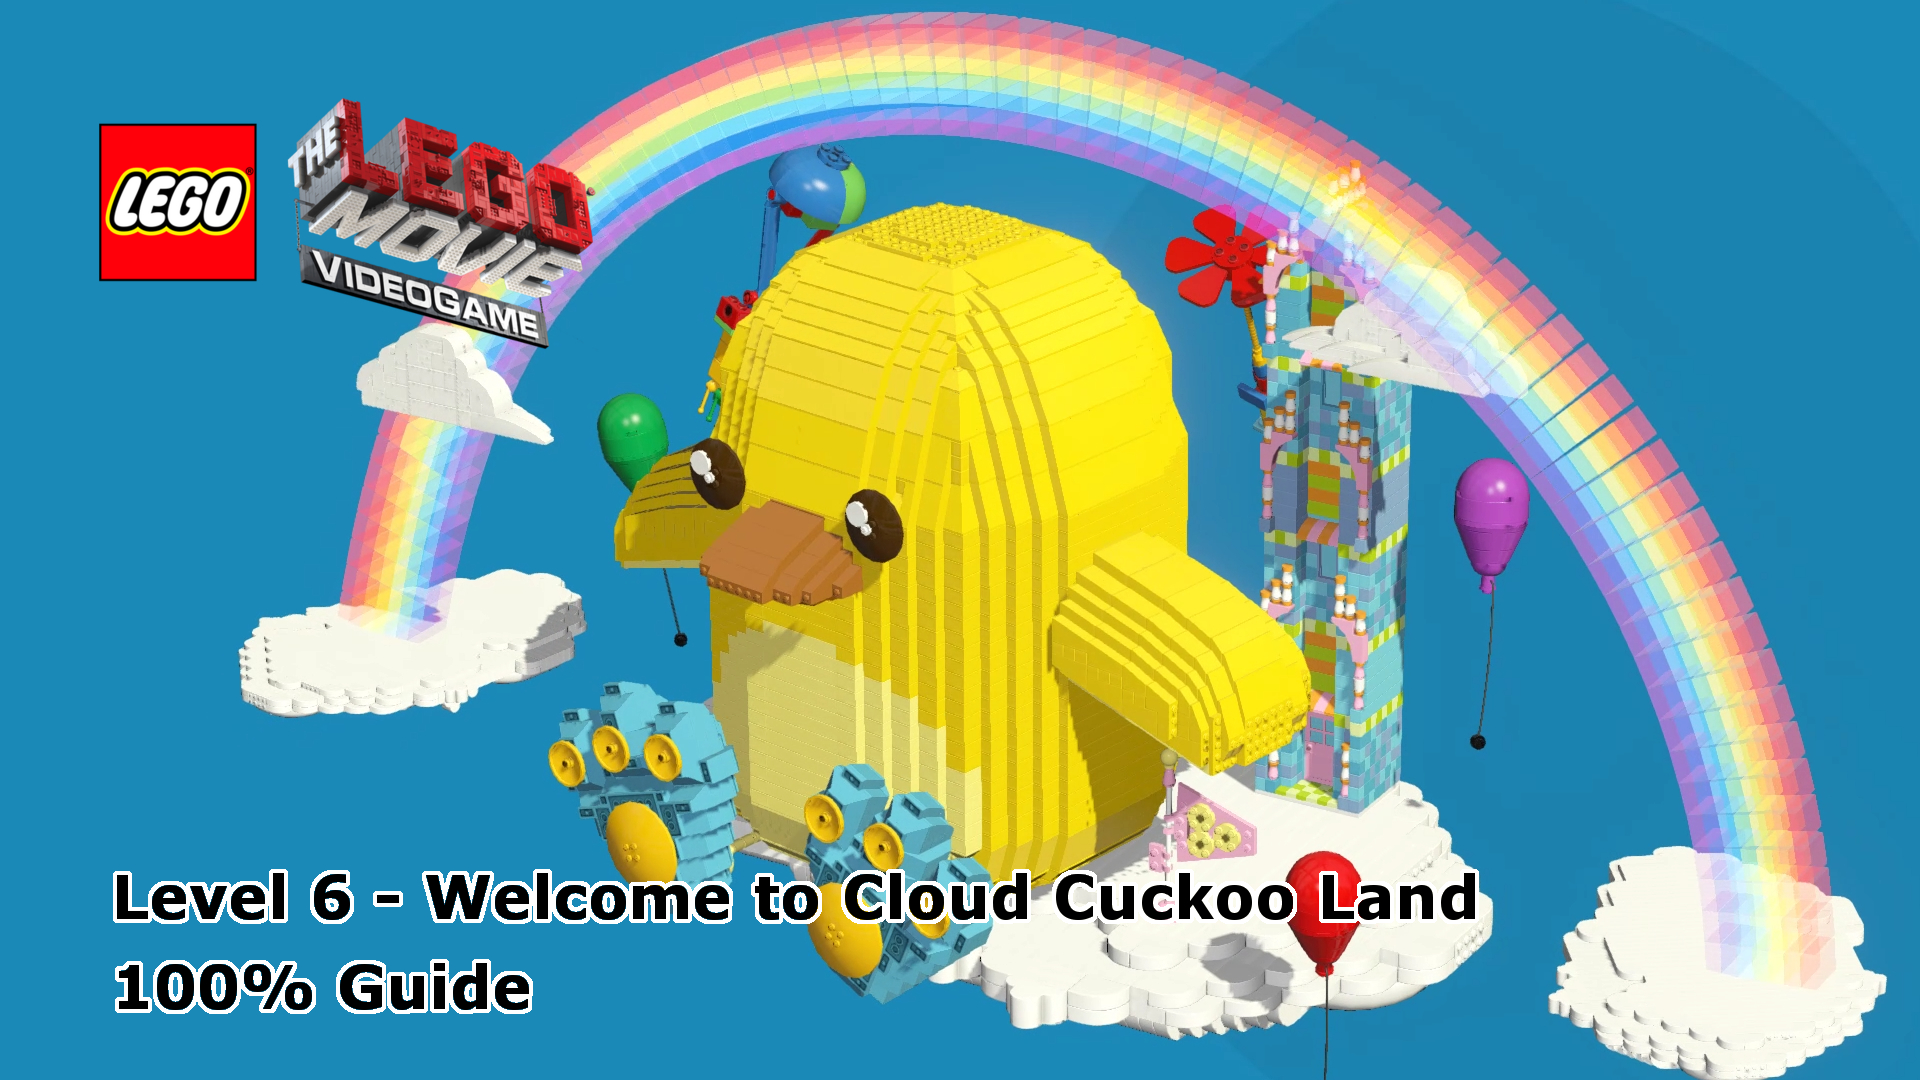 The LEGO Videogame – Cloud Cuckoo Land 100%